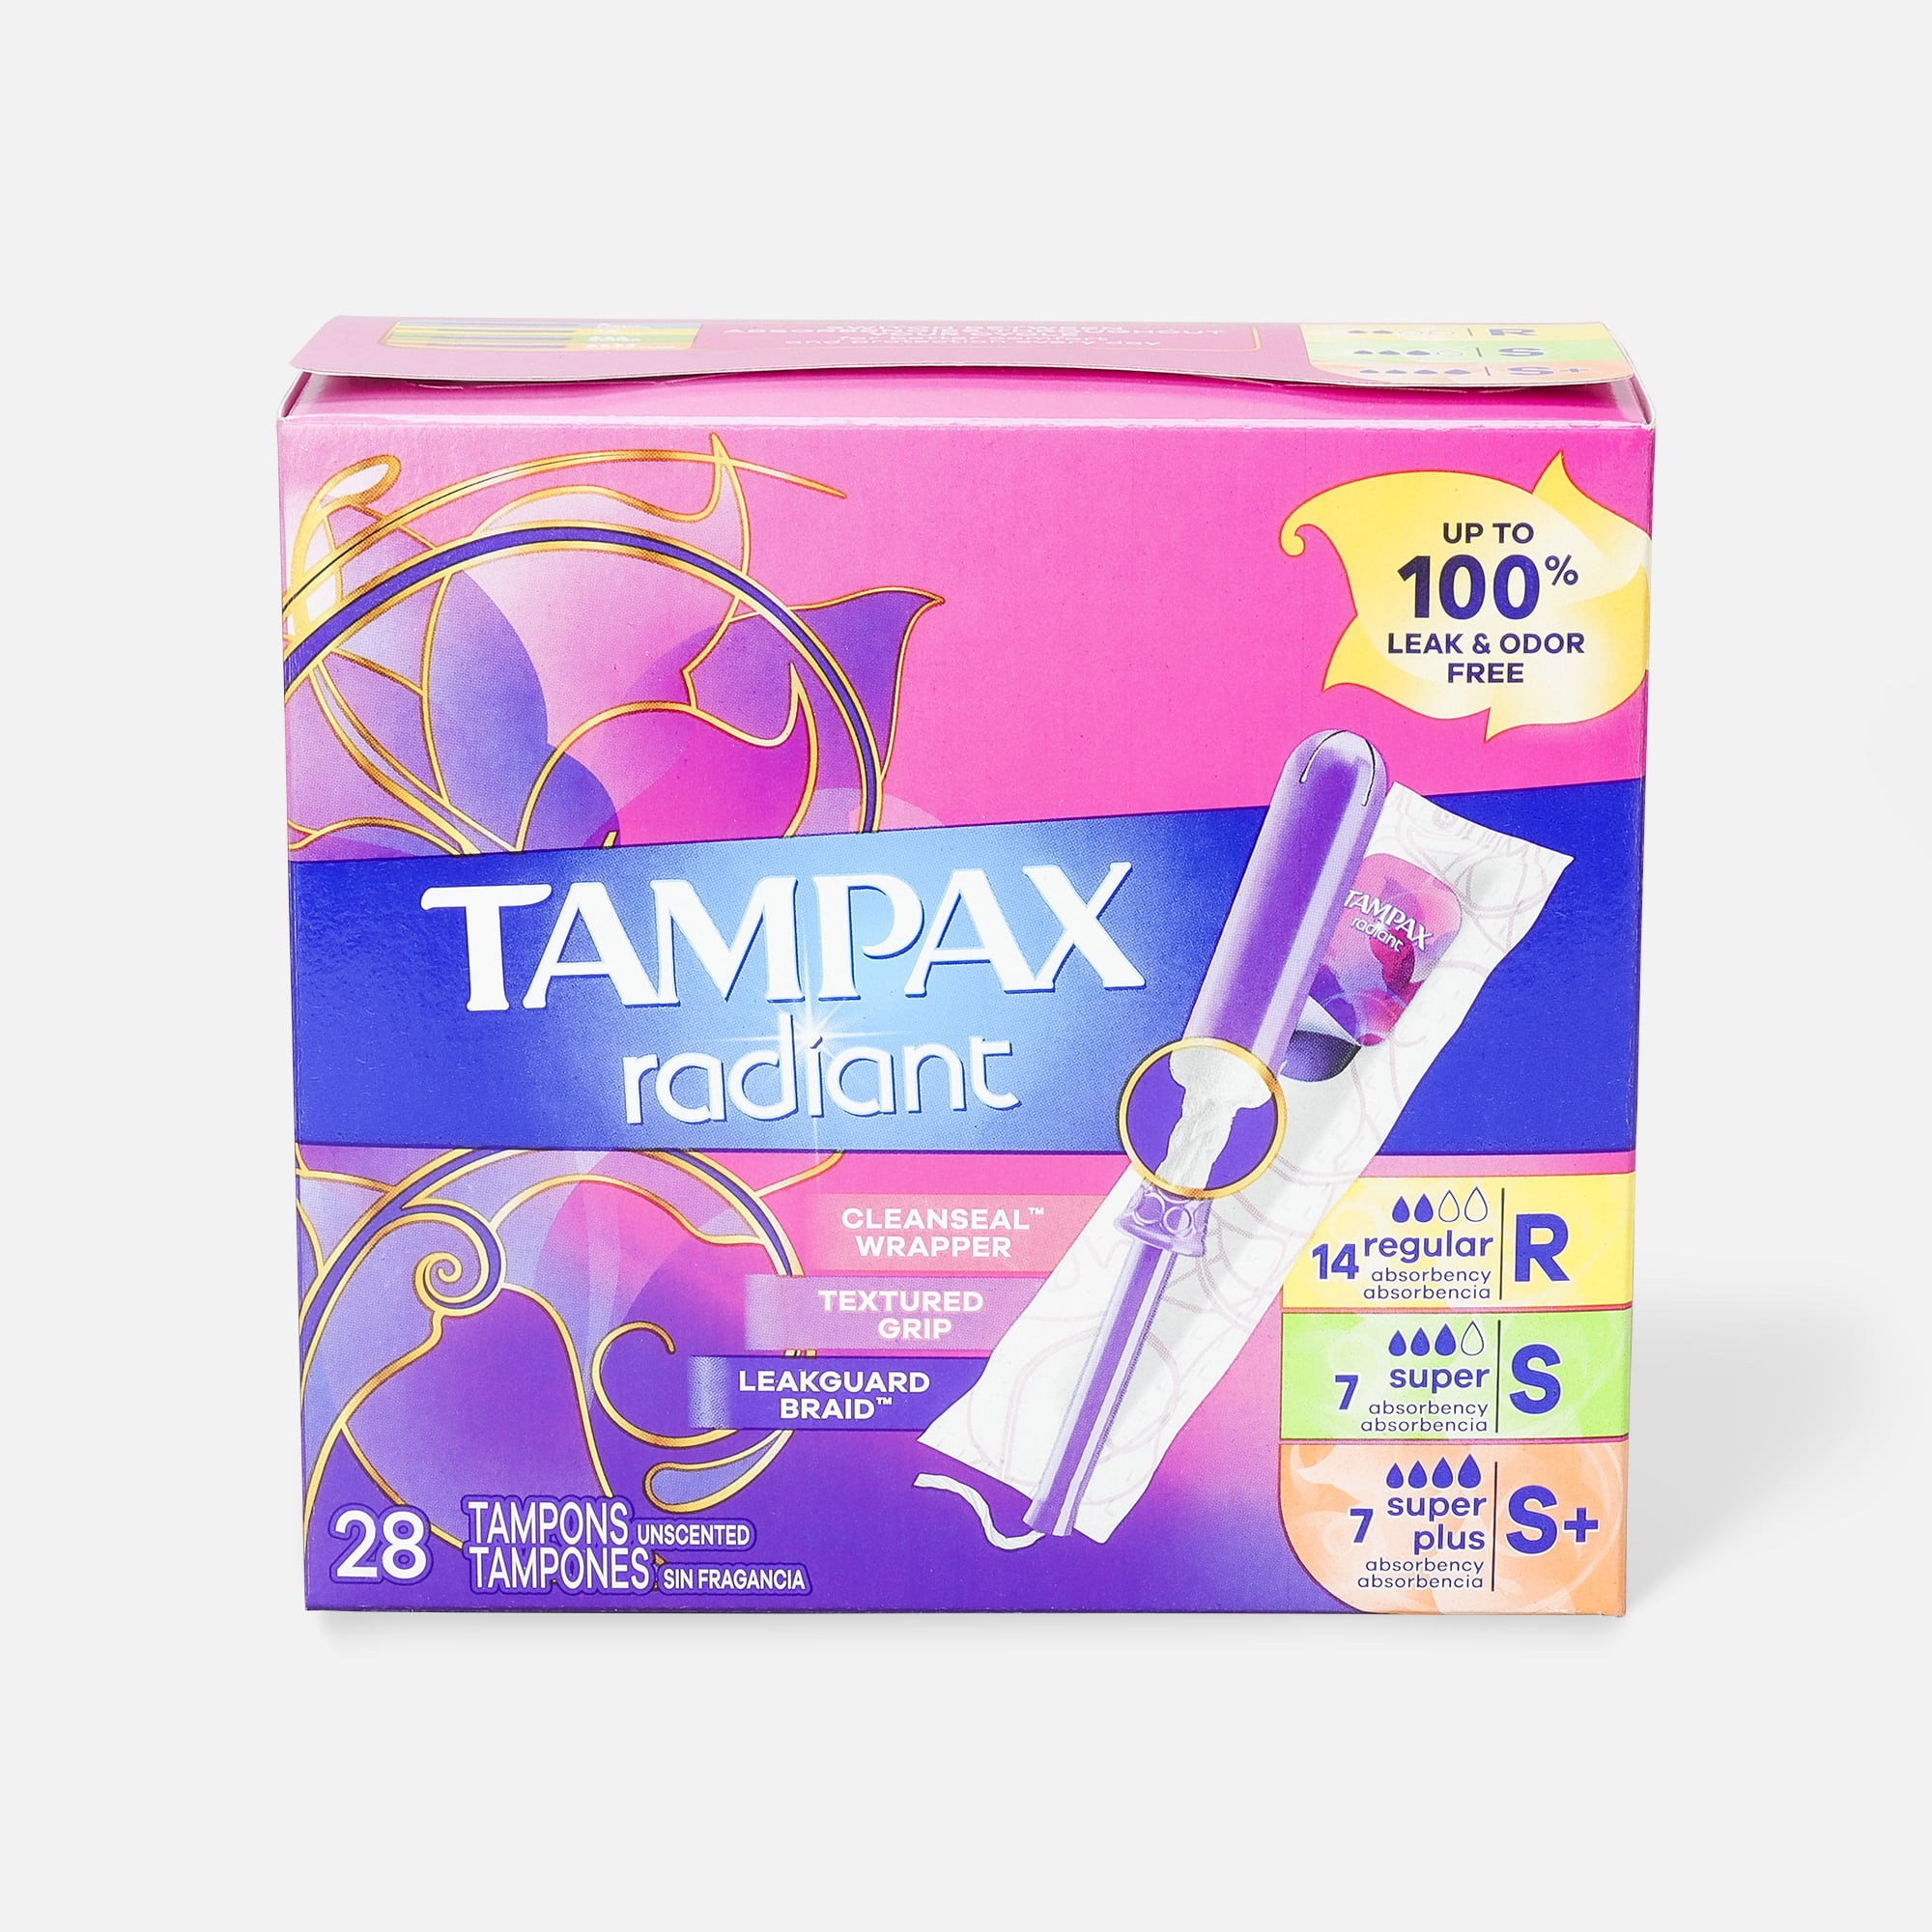 Tampax Radiant Tampons Trio Pack, Regular/Super/Super Plus Absorbency with  BPA-Free Plastic Applicator and LeakGuard Braid, Unscented, 28 Count